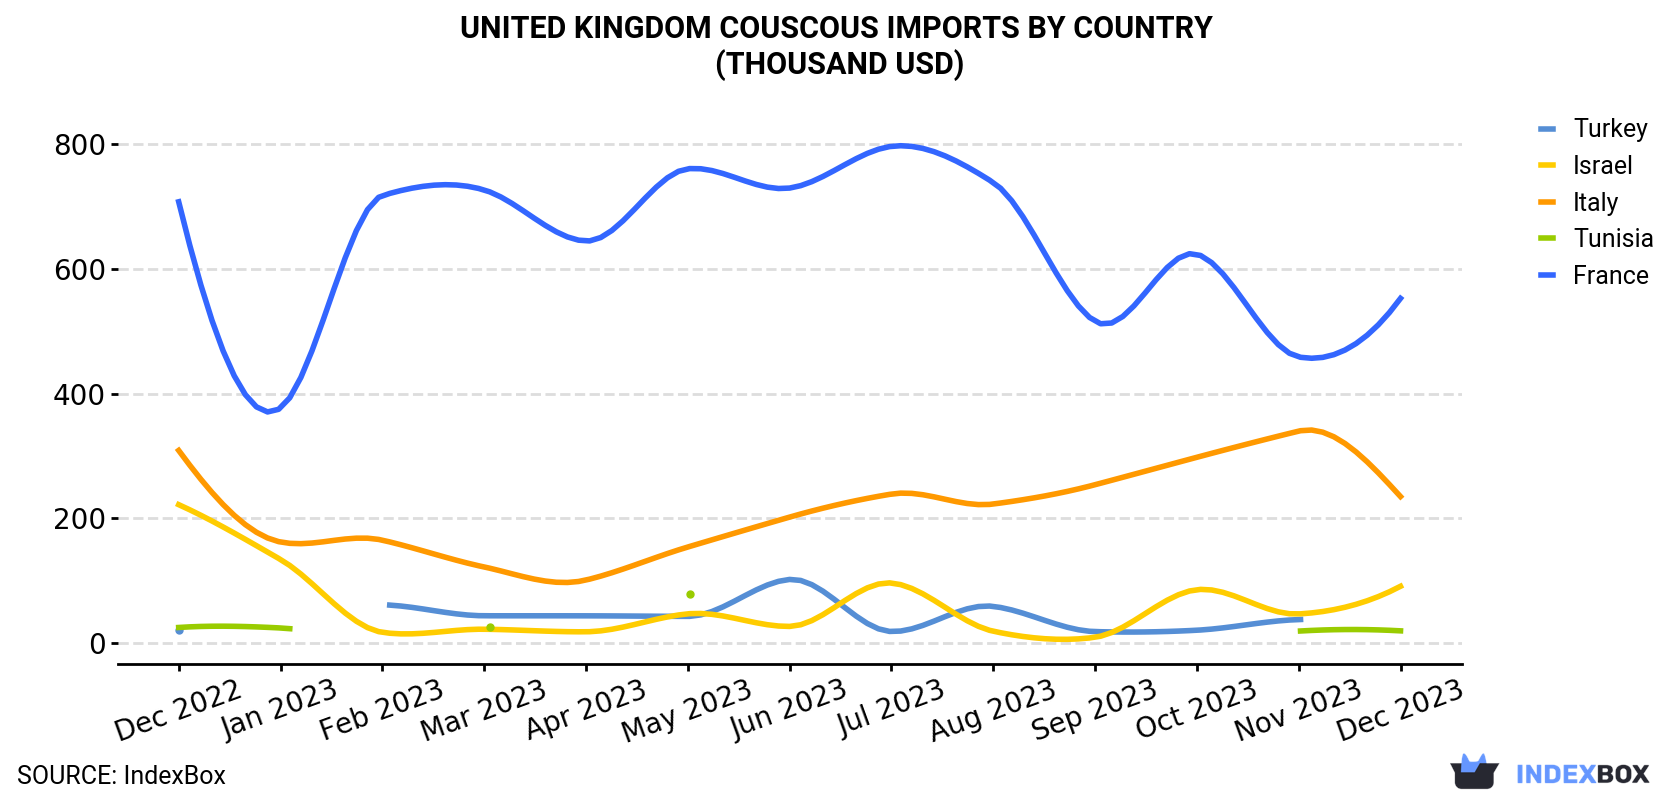 United Kingdom Couscous Imports By Country (Thousand USD)